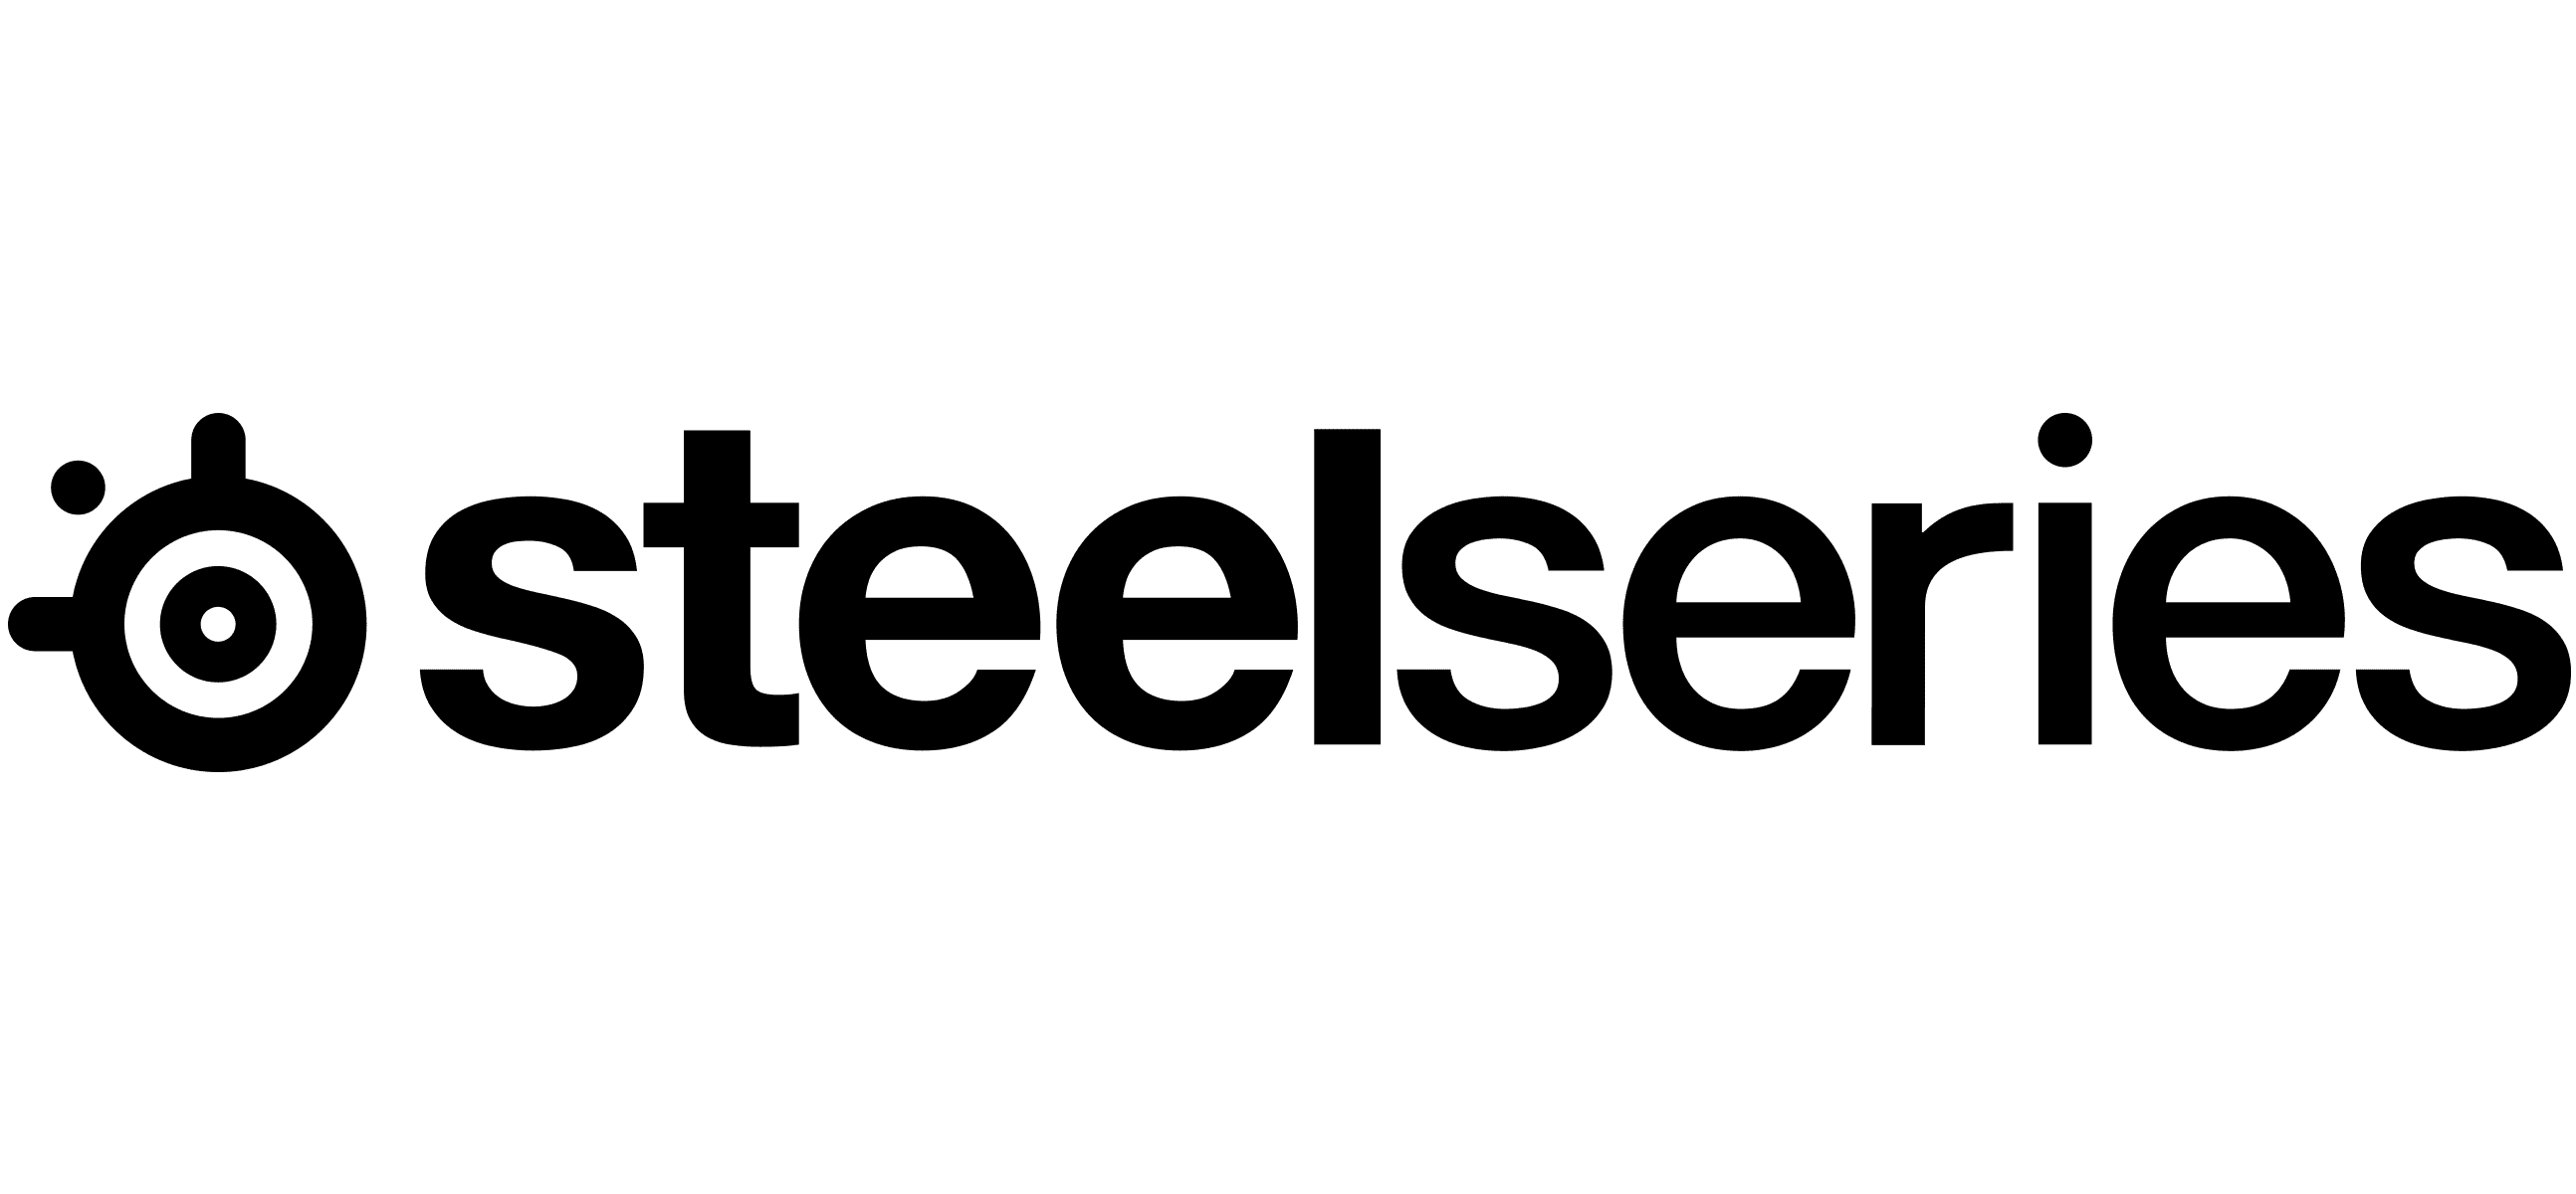 Steelseries Coupons & Promo Codes